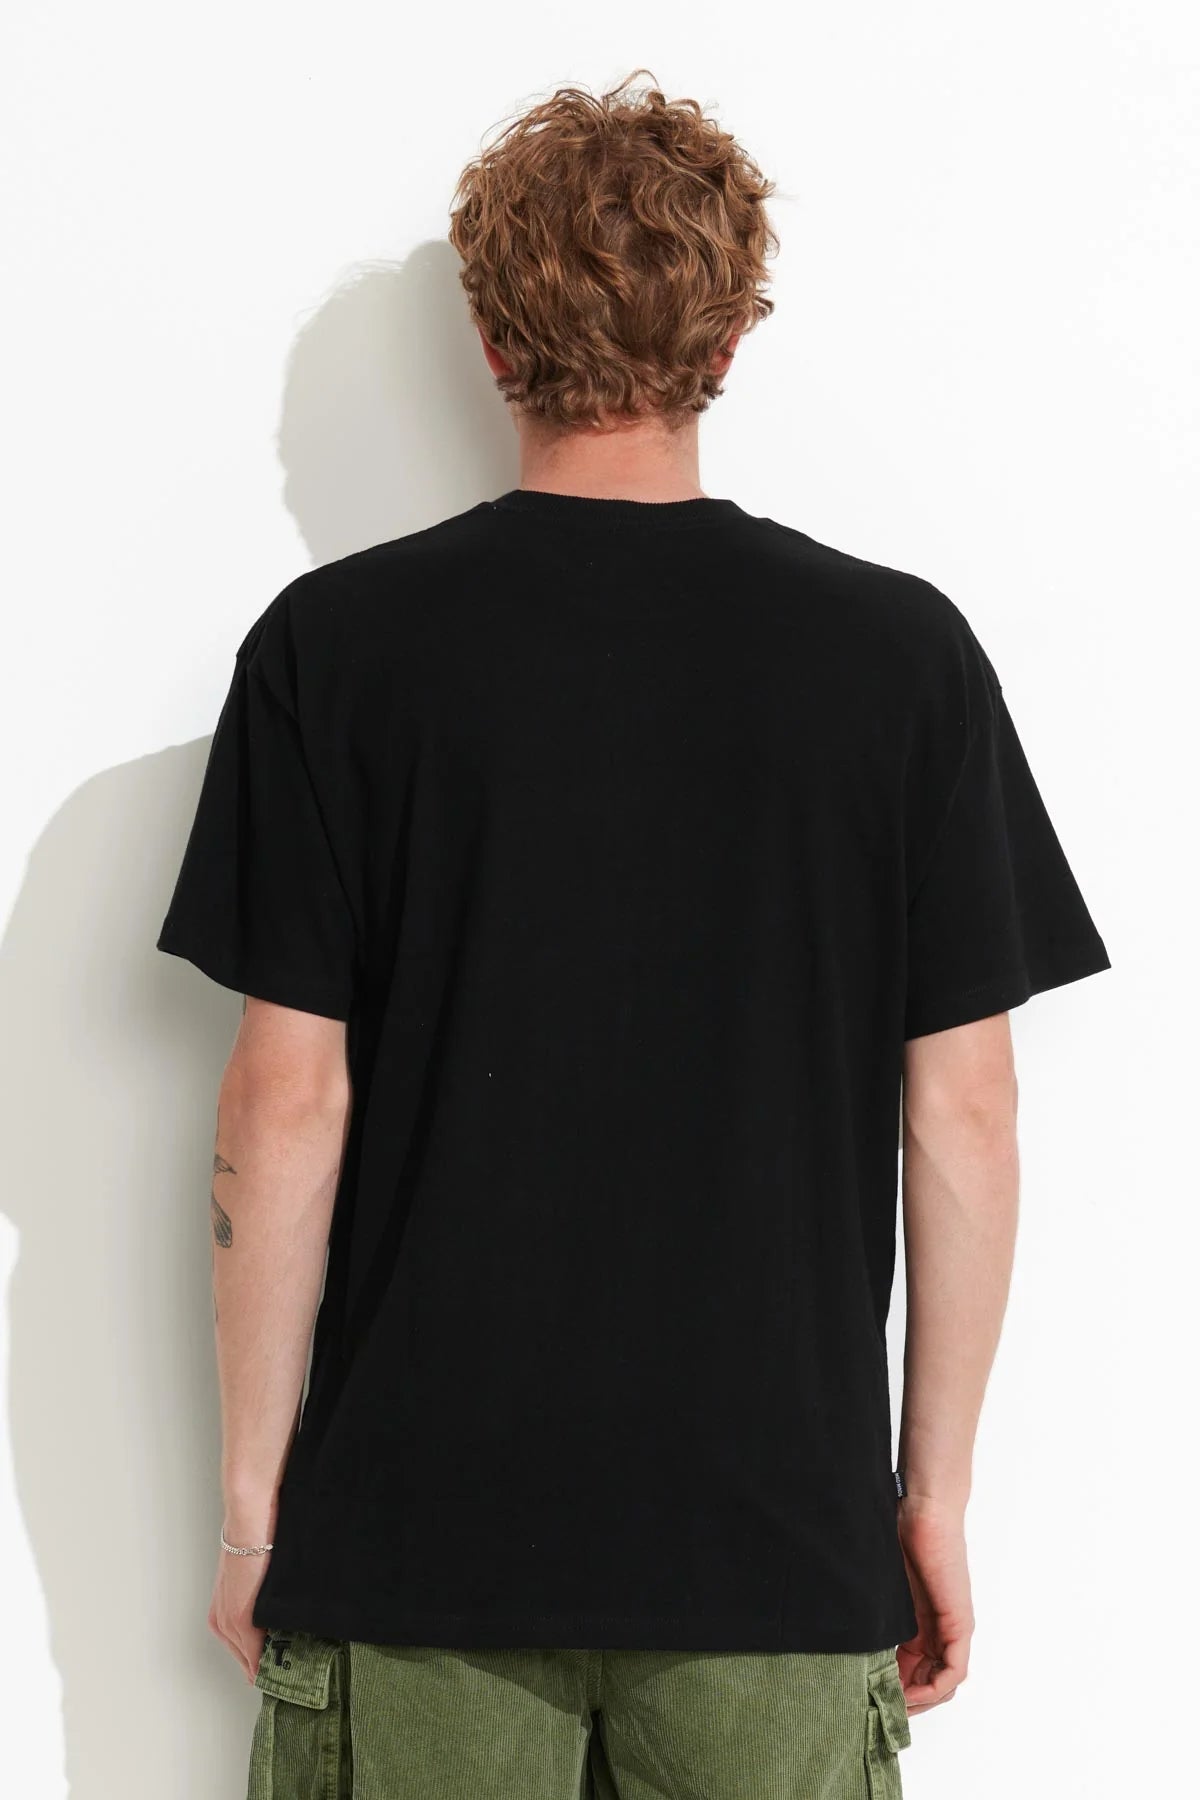 MISFIT // Supercorporate 2.0 SS Tee WASHED BLACK